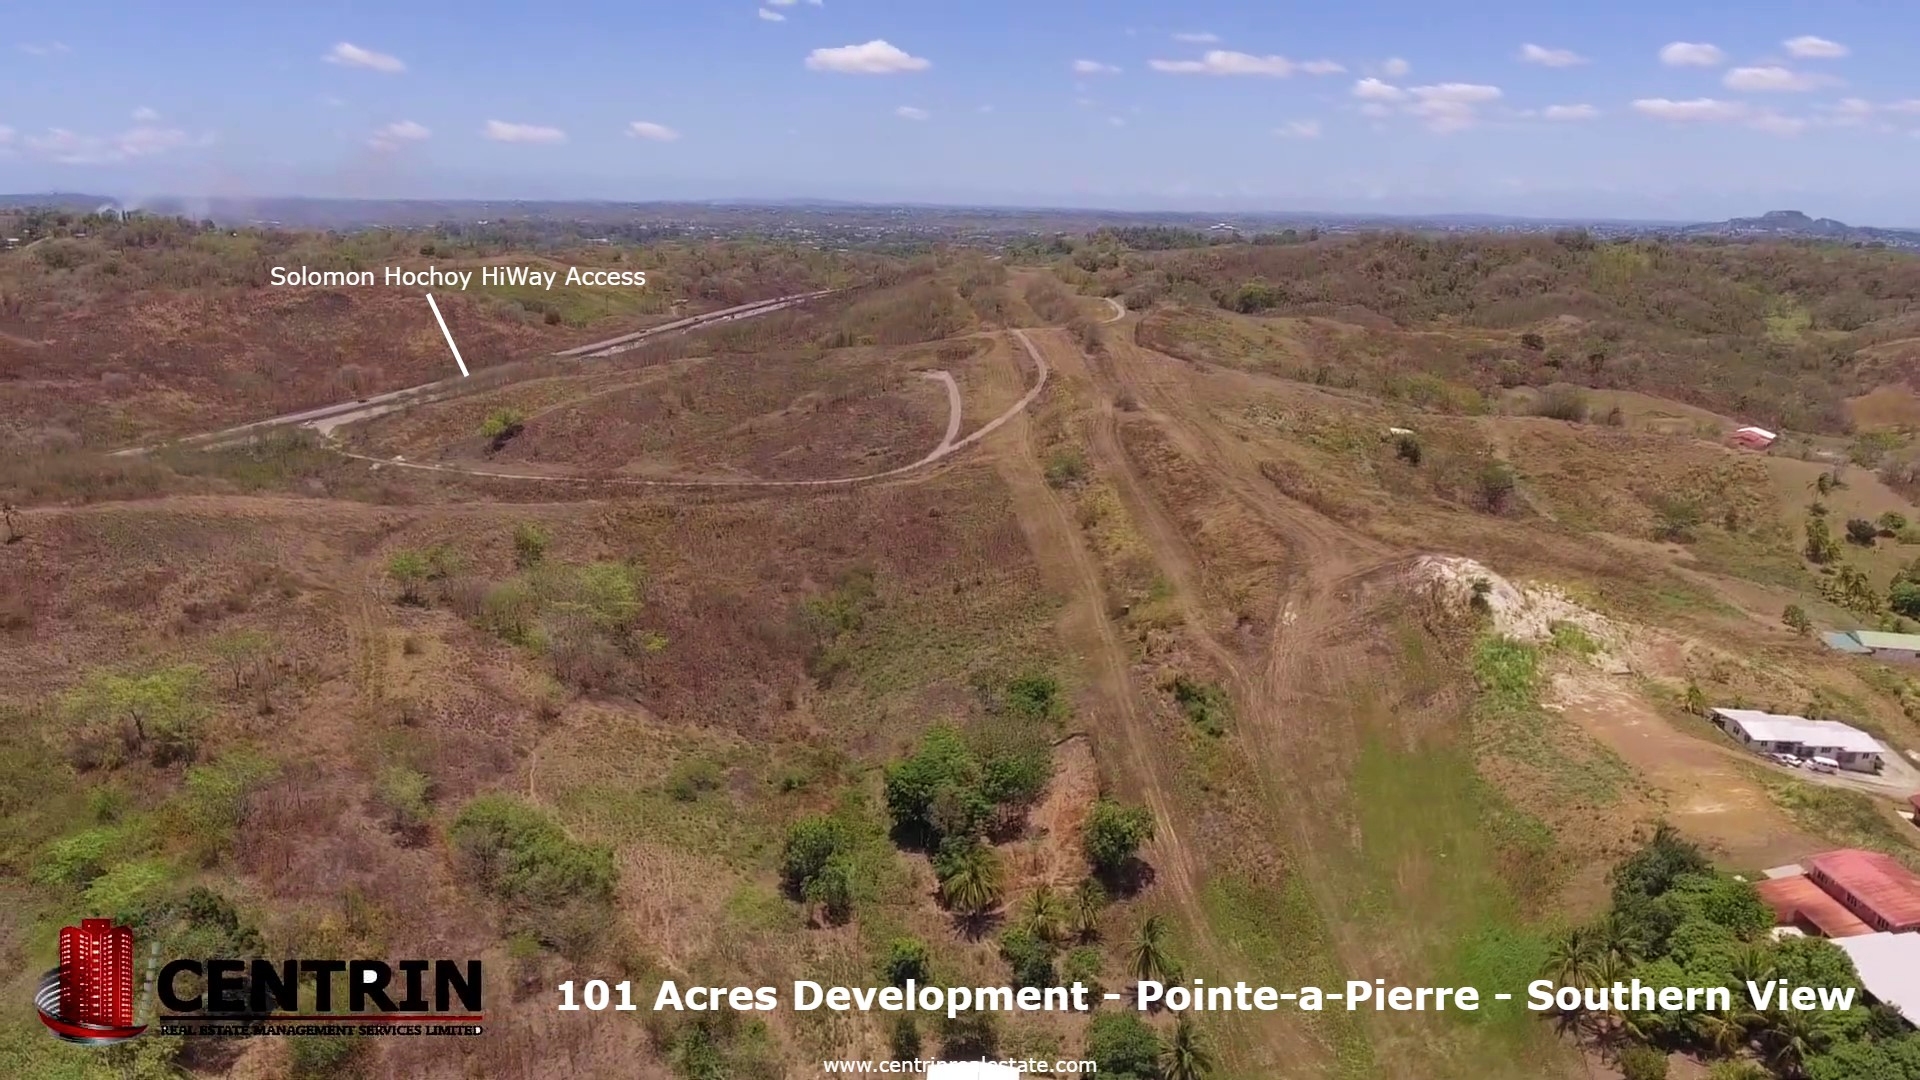 92A Land for sale trinidad